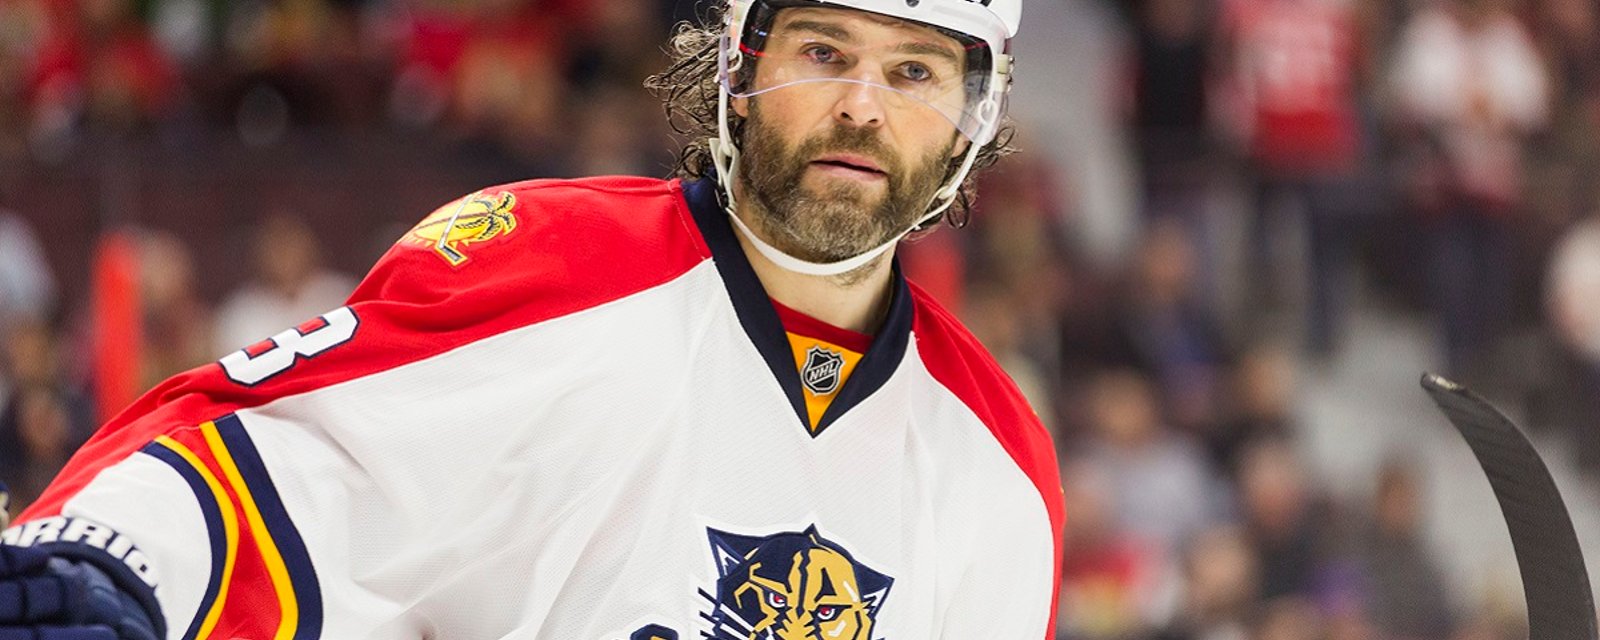 Jaromir Jagr has changed his mind about playing until he's 50.